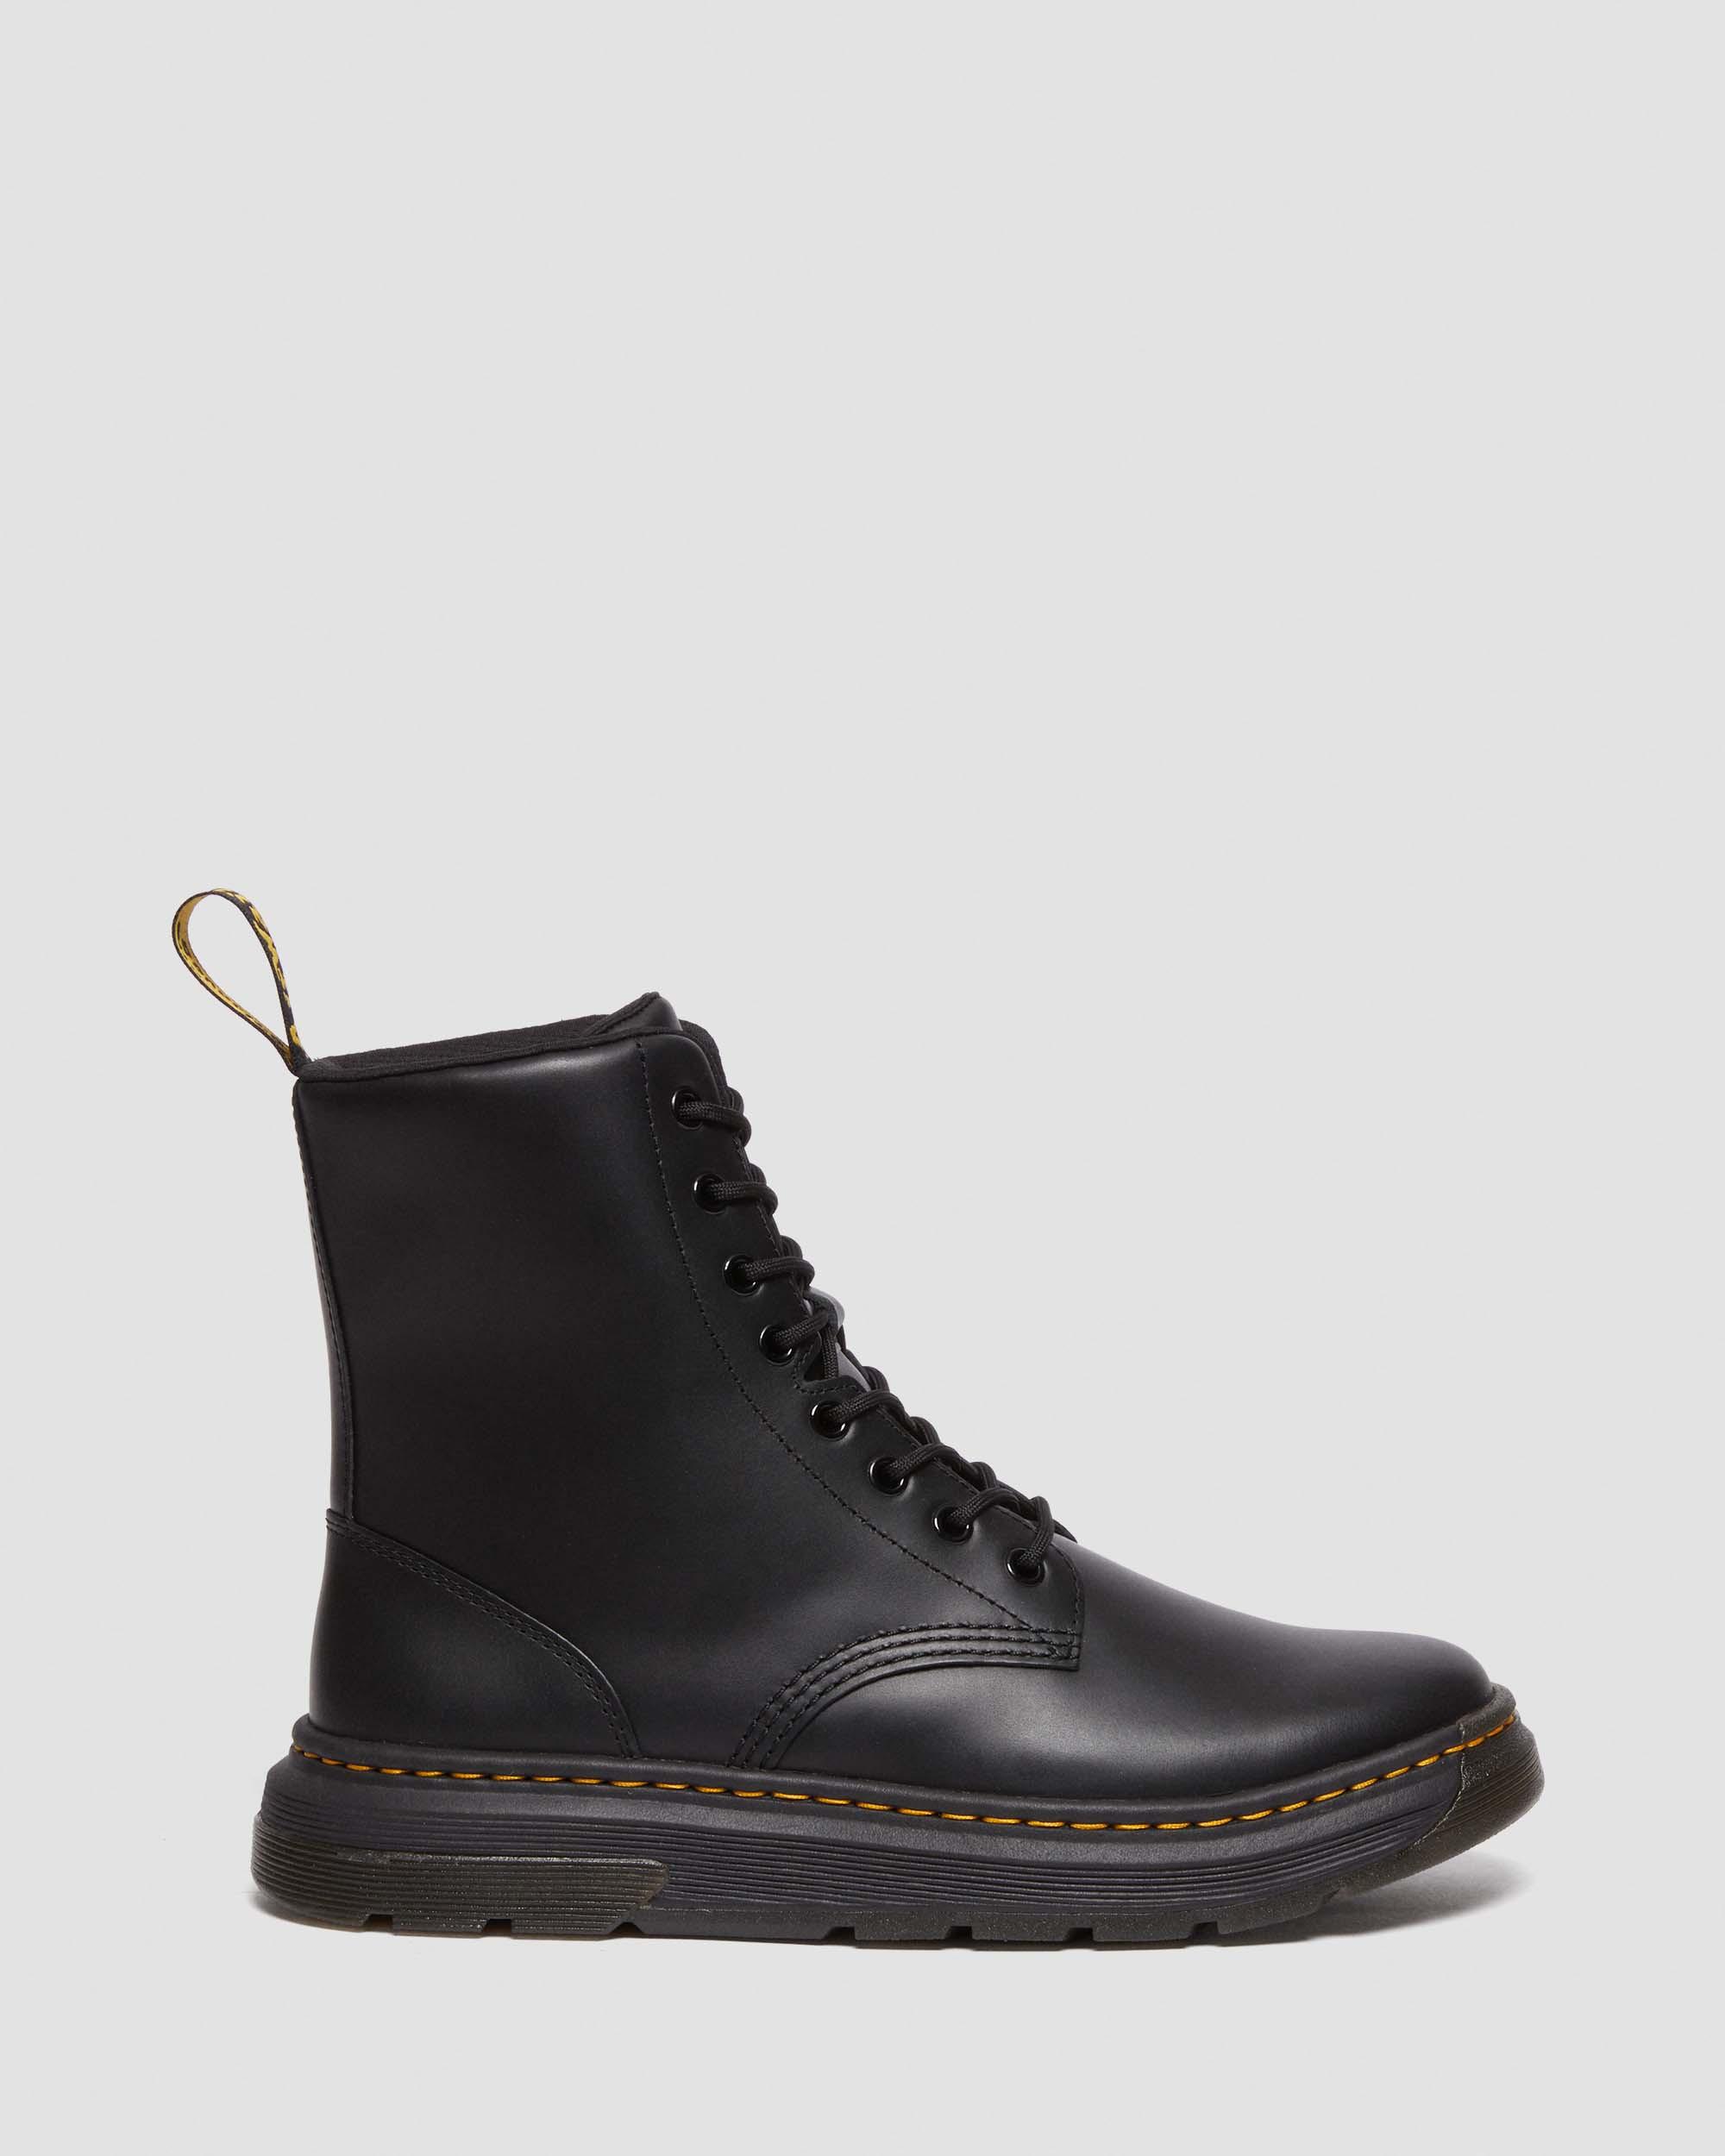 Crewson Leather Lace Up Boots in Black | Dr. Martens